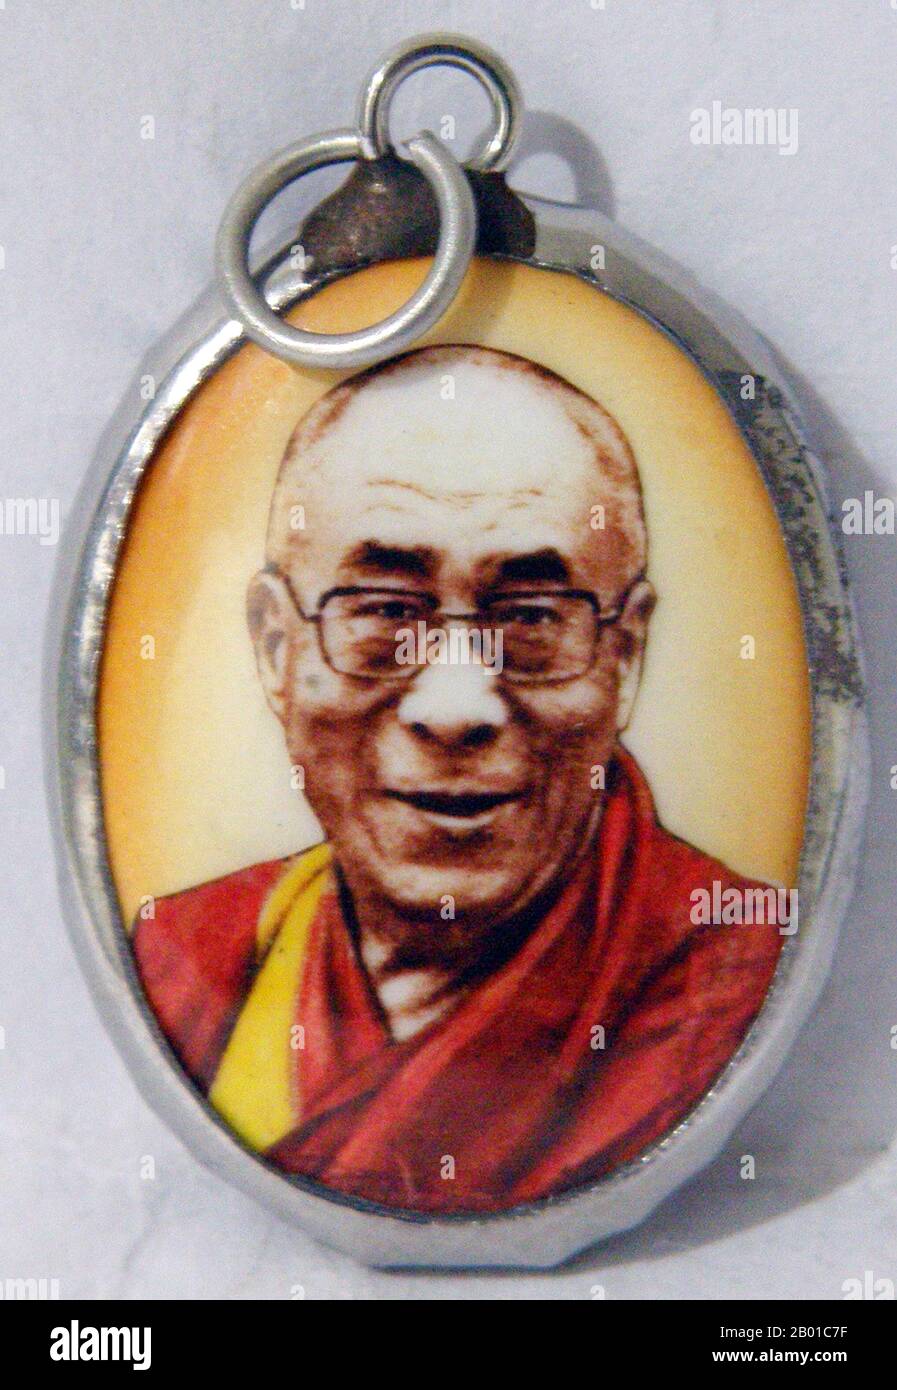 Tibet/China/India: Tibetan Buddhist amulet of the 14th Dalai Lama, Tenzin Gyatso (6 July 1935-).  The 14th Dalai Lama (Religious name: Tenzin Gyatso, shortened from Jetsun Jamphel Ngawang Lobsang Yeshe Tenzin Gyatso, born Lhamo Dondrub) is the 14th and current Dalai Lama. Dalai Lamas are the most influential figure in the Gelugpa lineage of Tibetan Buddhism, although the 14th has consolidated control over the other lineages in recent years.  He won the Nobel Peace Prize in 1989, and is also well known for his lifelong advocacy for Tibetans inside and outside Tibet. Stock Photo